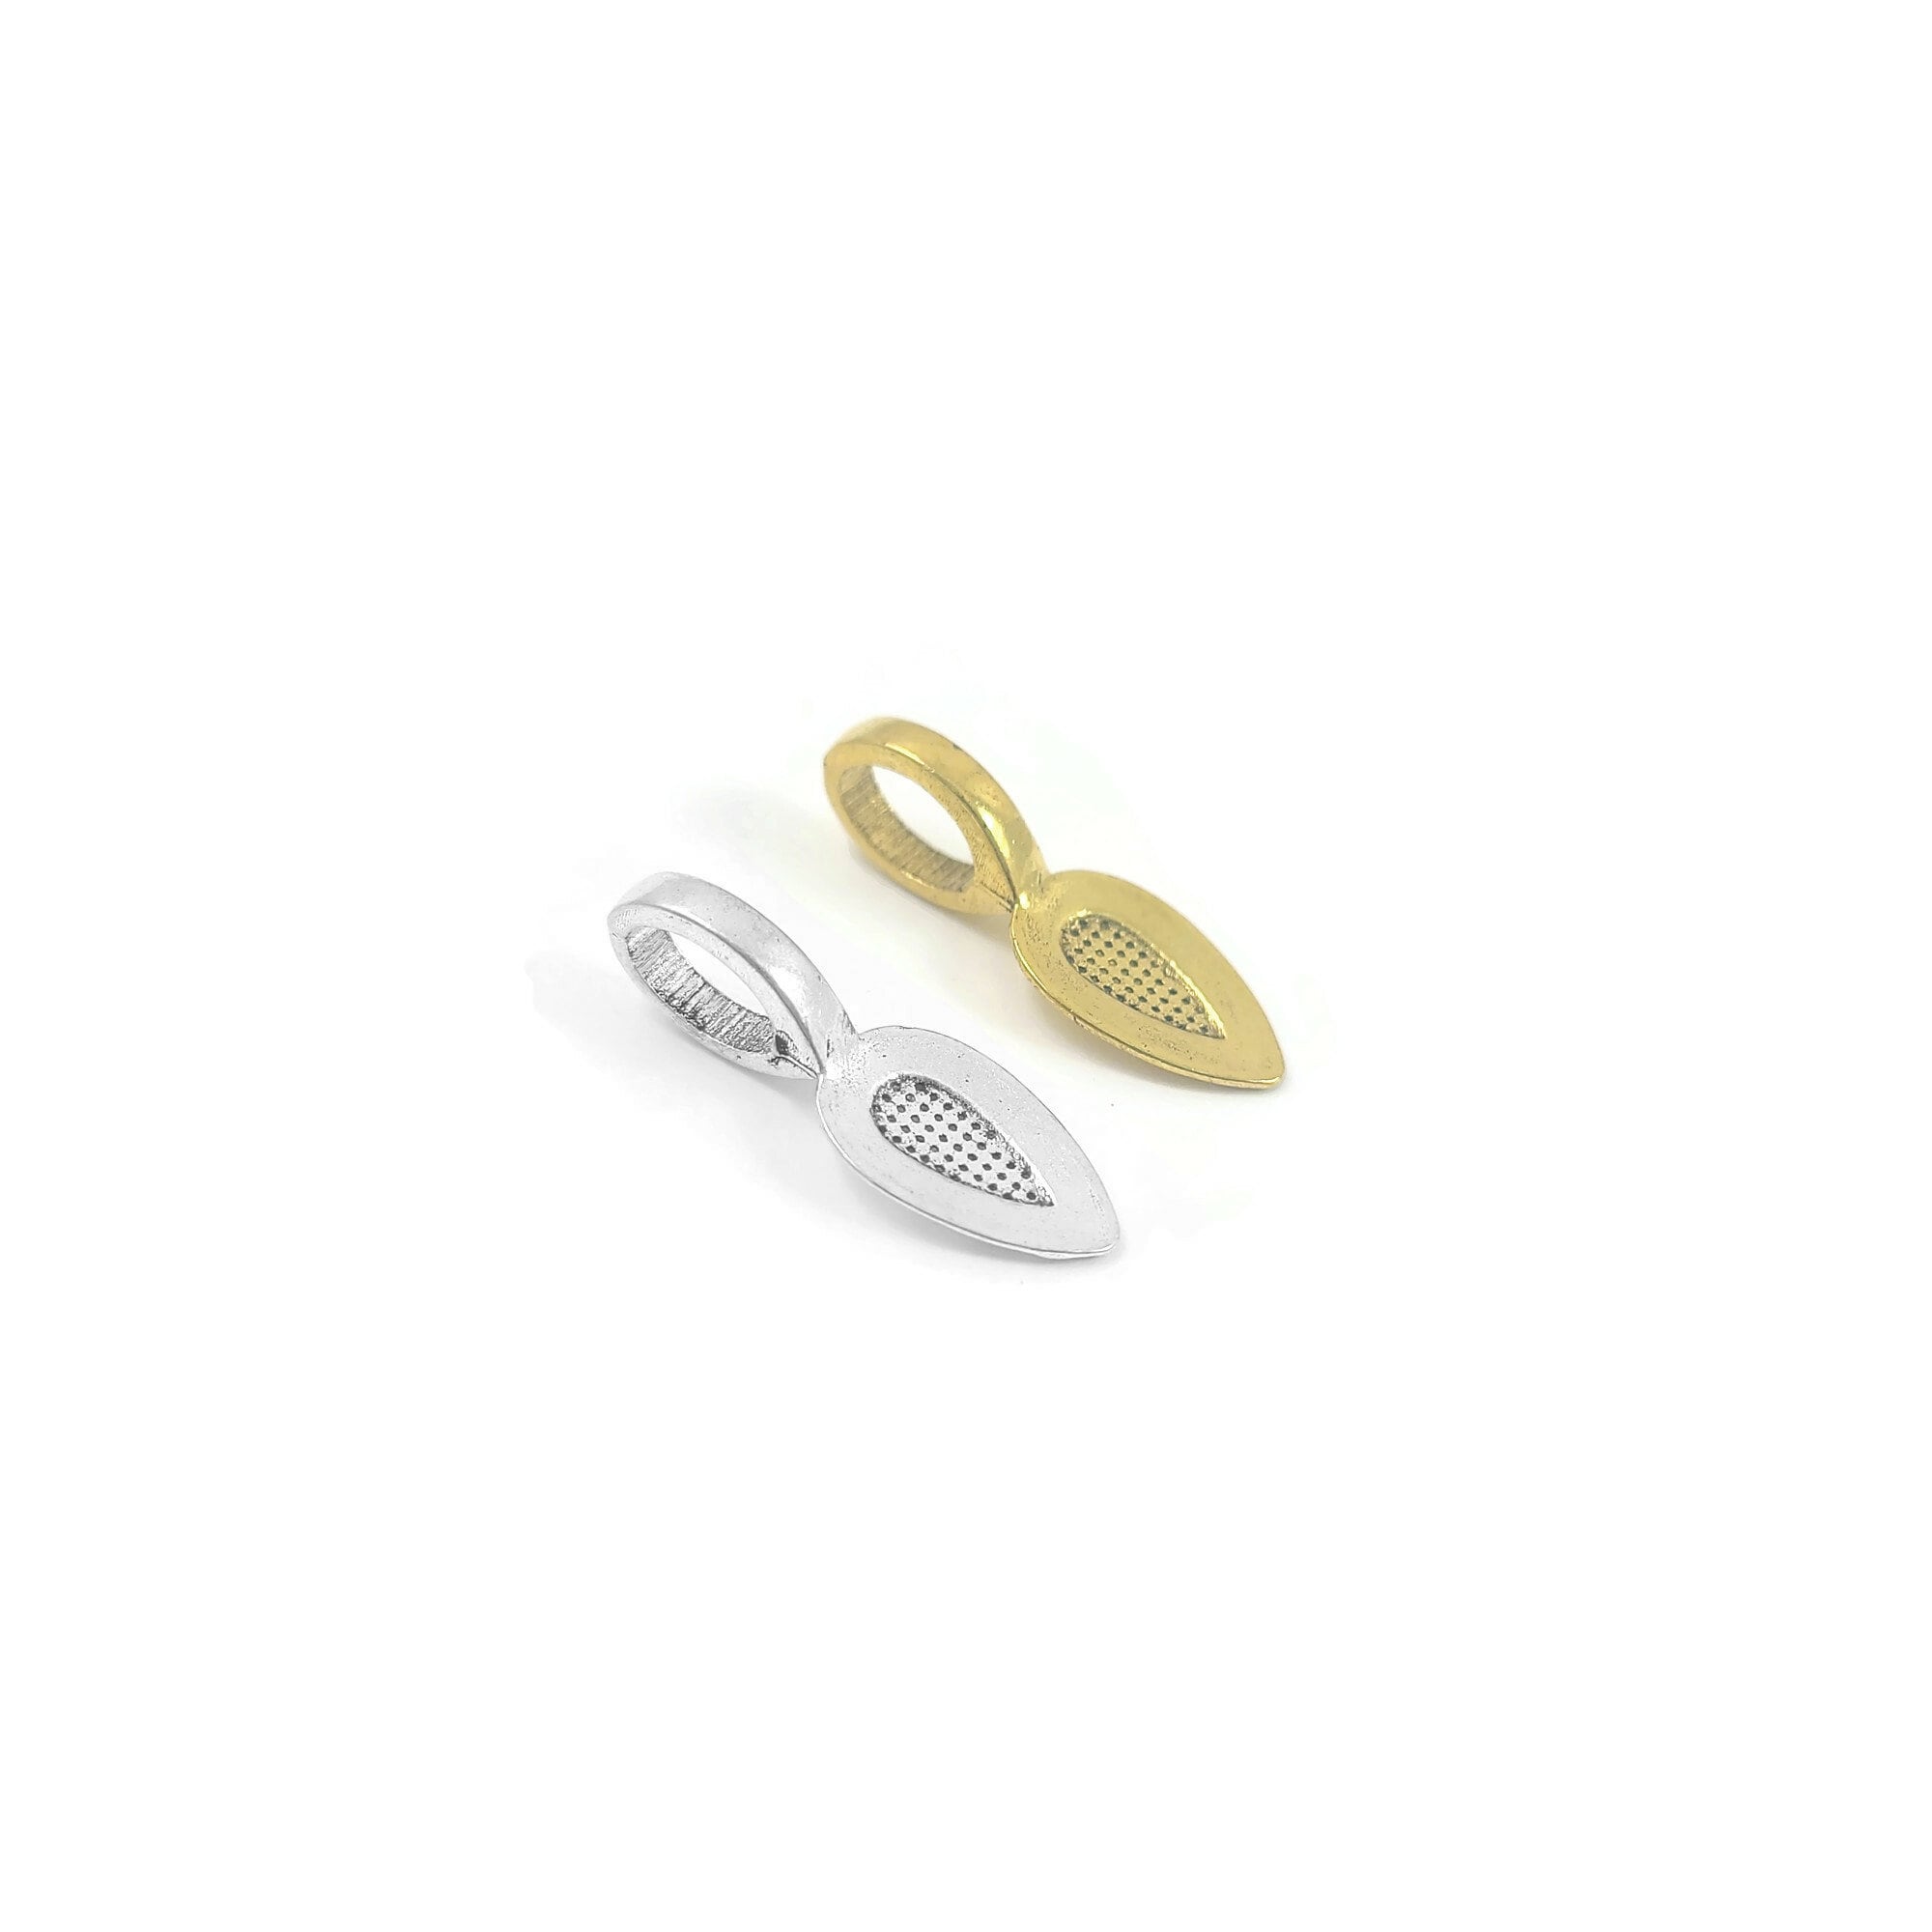 Glue on bails, Gold, Silver, Leaf oval pad, Hypoallergenic nickel free jewelry findings, Pendant making parts